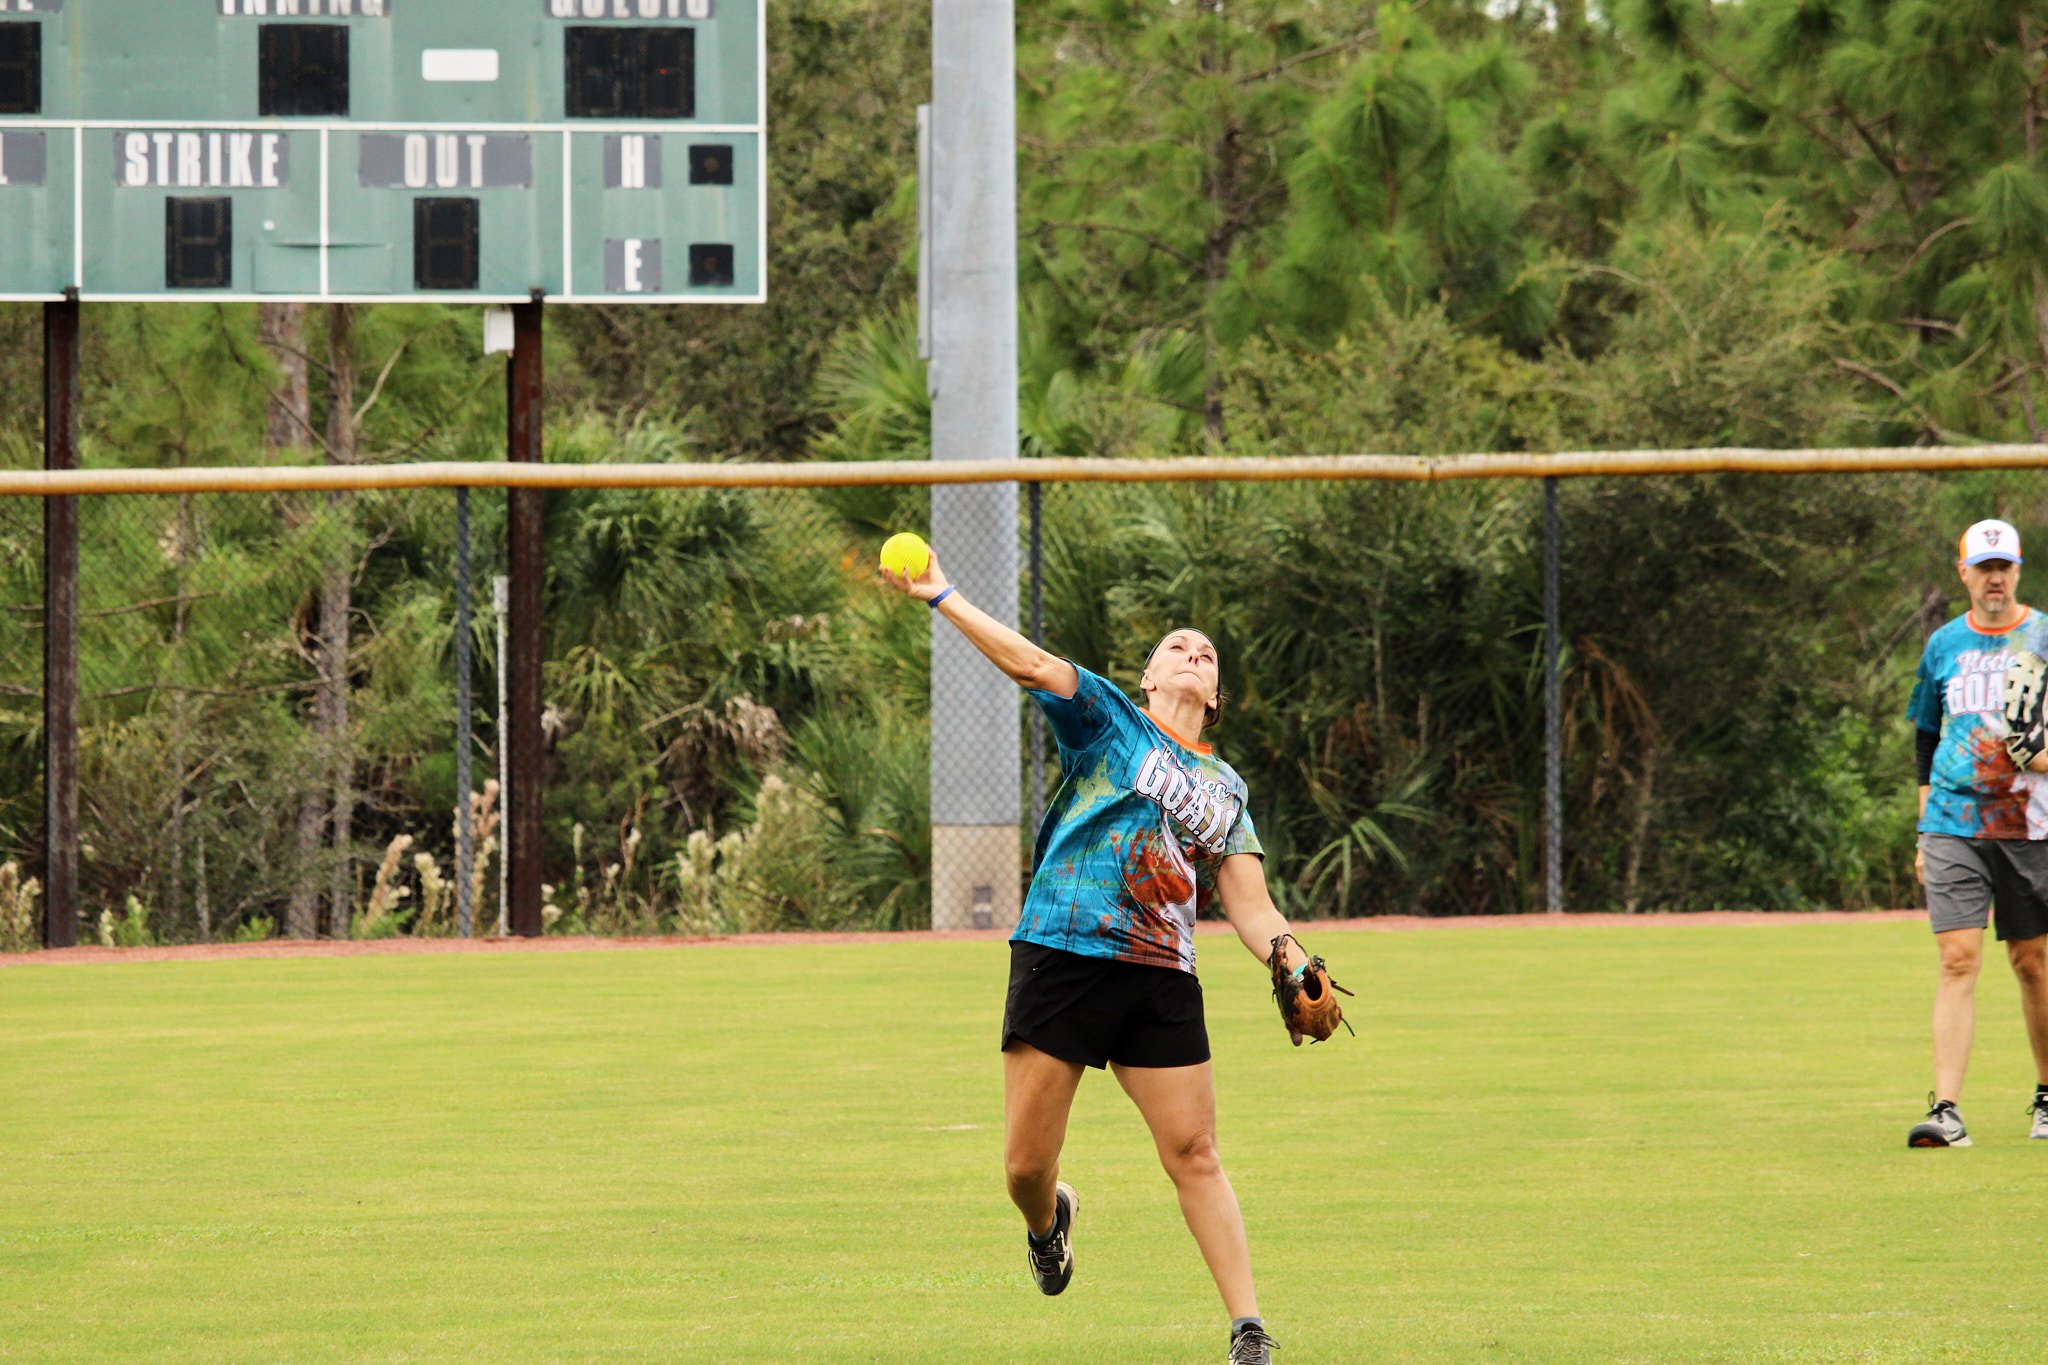 Action - Tabitha Stokes throws with all her might #1.jpg